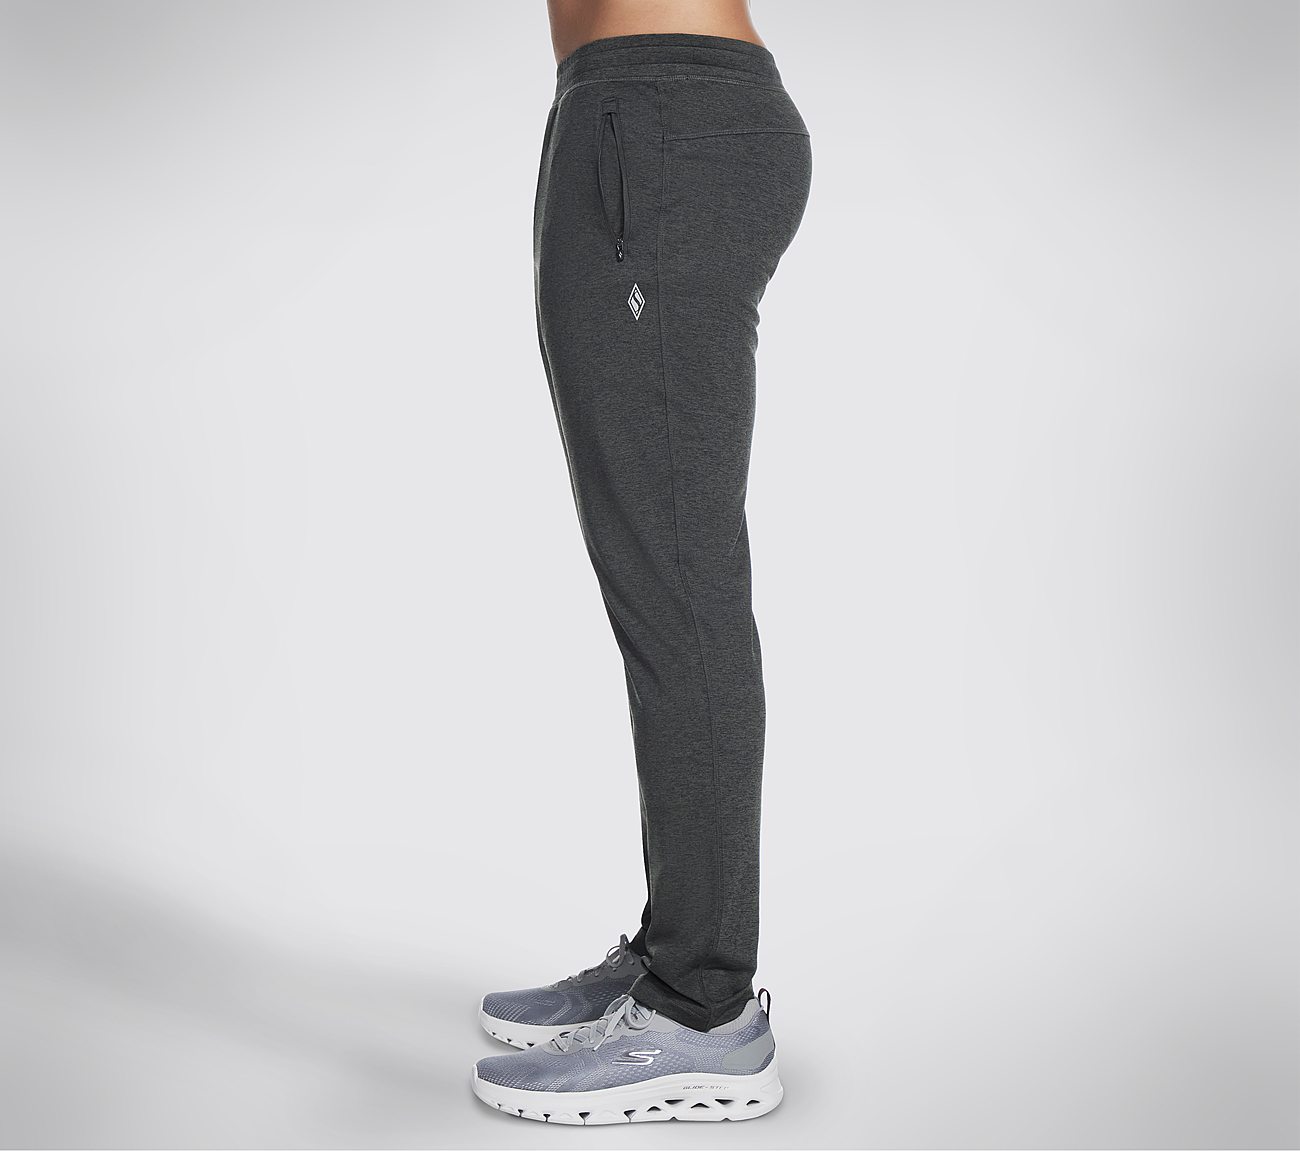 SKECH-KNITS ULTRA GO TAPERED, CCHARCOAL Apparels Bottom View